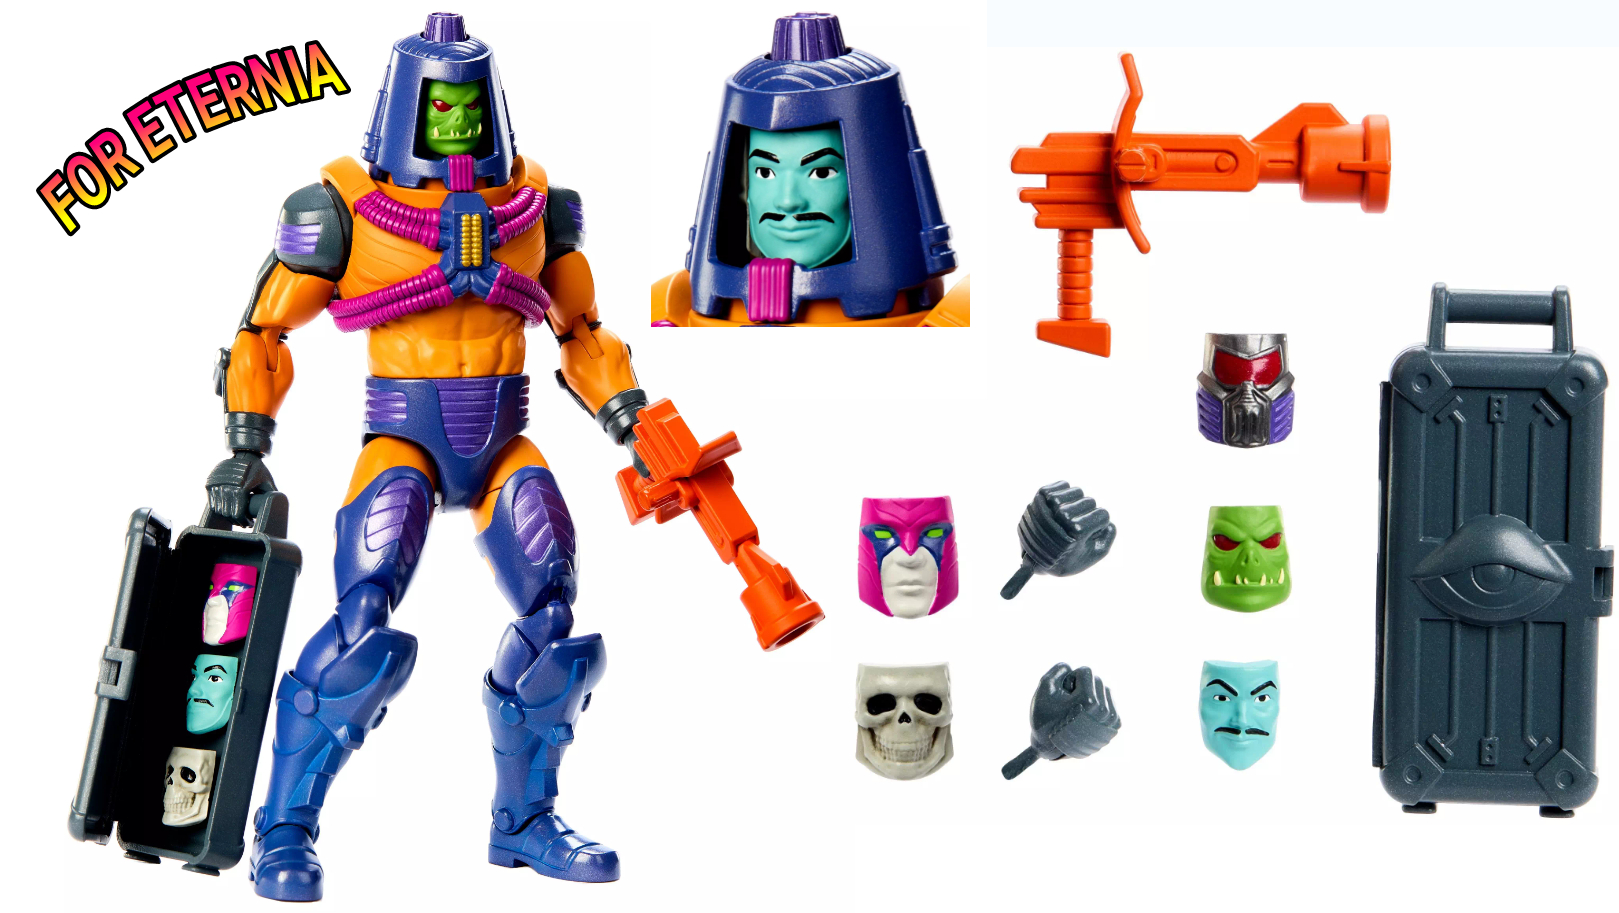 Man-E-Faces is coming to the Masterverse New Eternia action figure line!